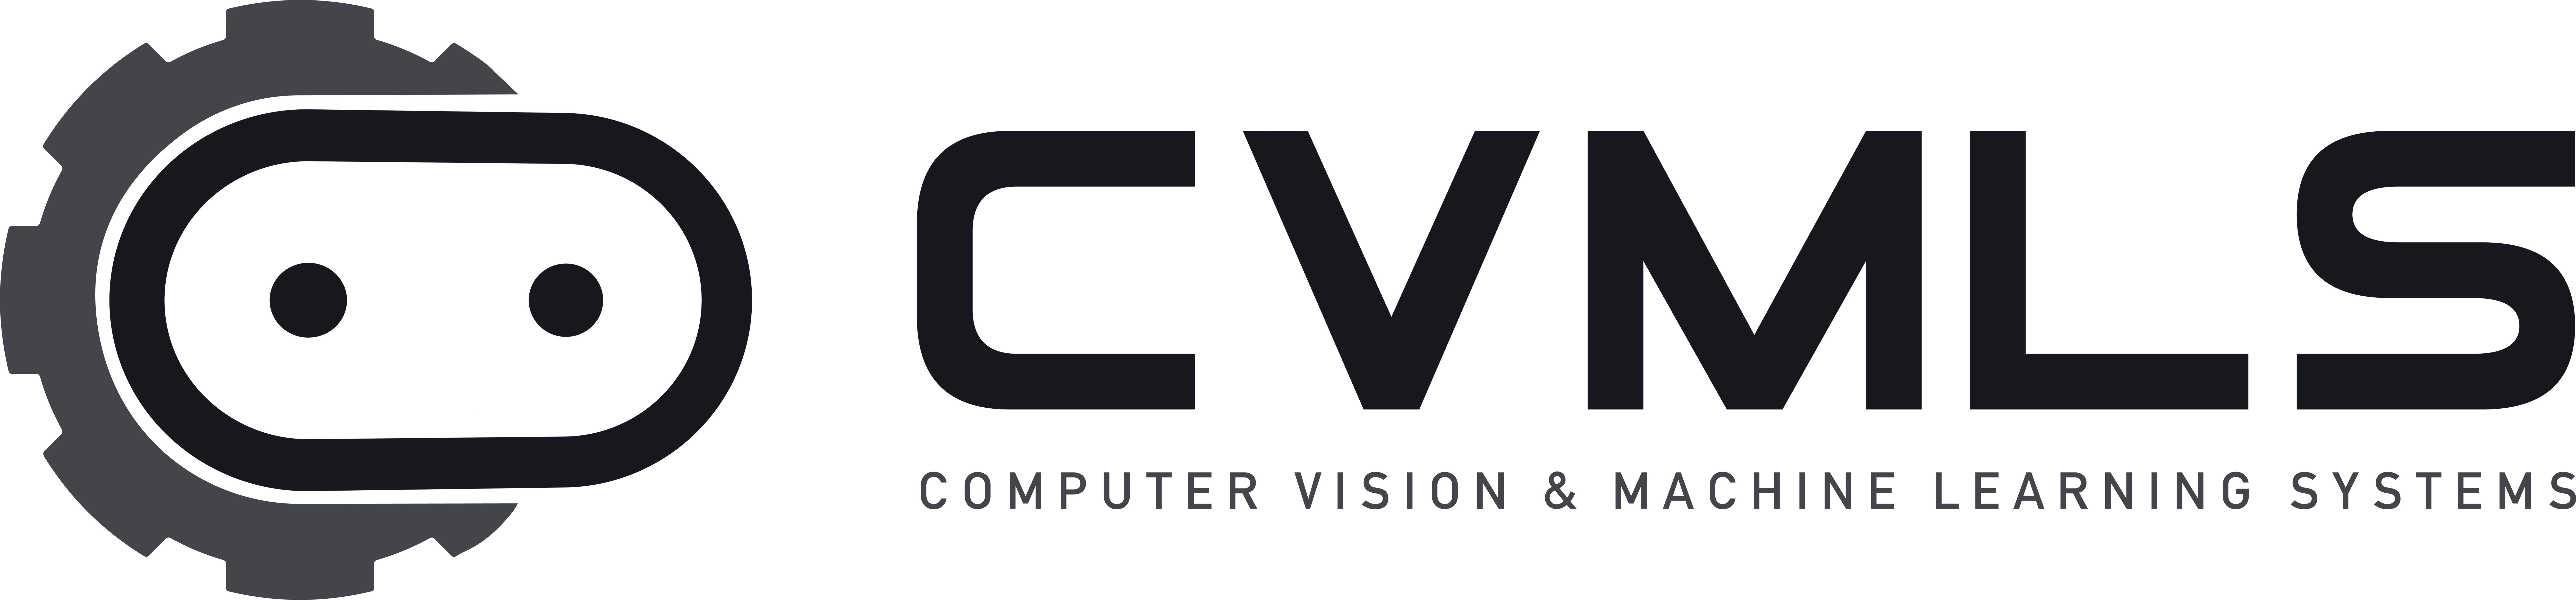 Computer Vision & Machine Learning Systems